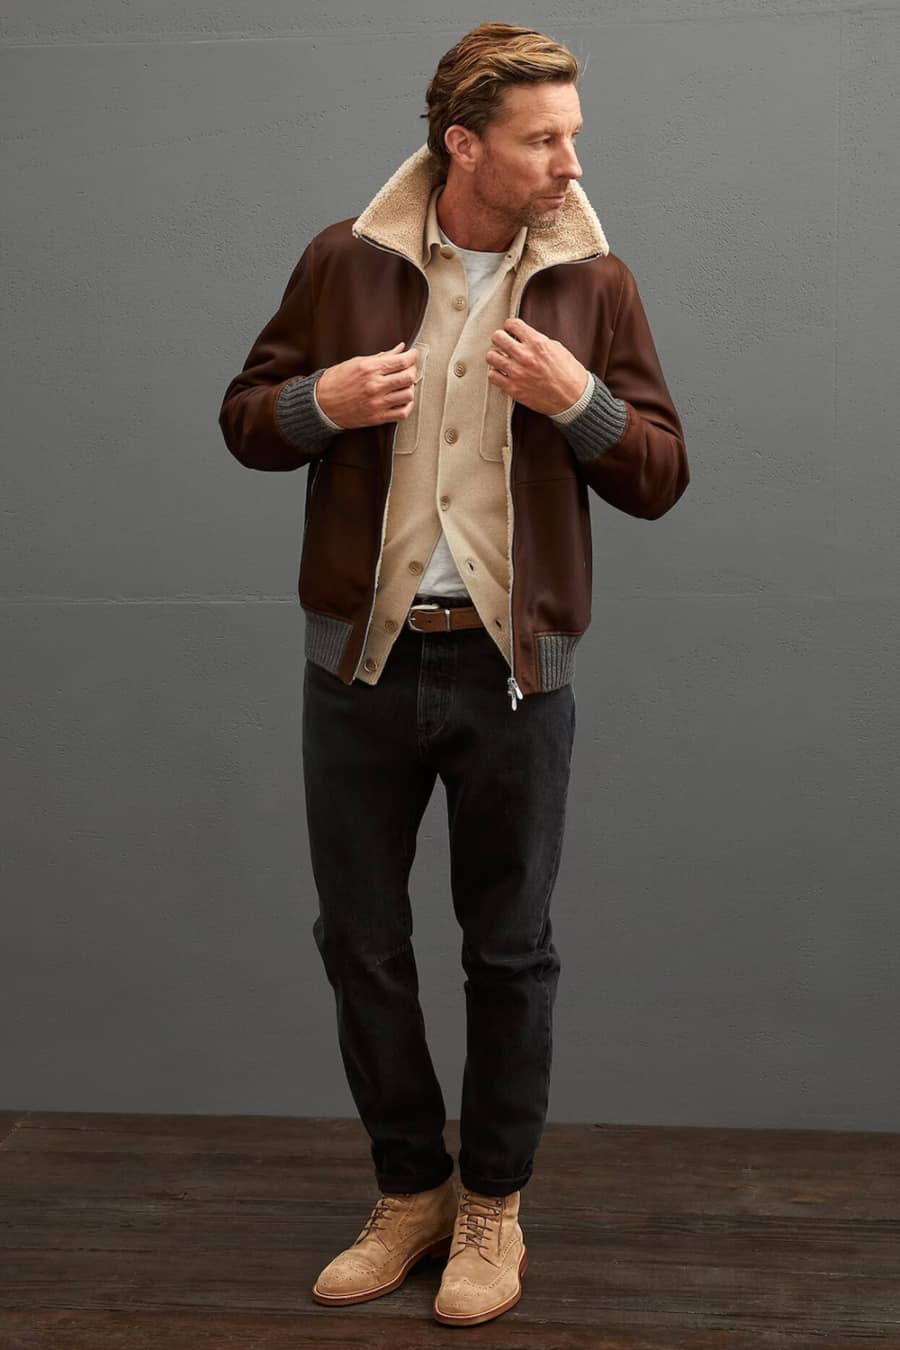 Men's black jeans, white T-shirt, camel cardigan, brown shearling jacket and beige suede boots outfit